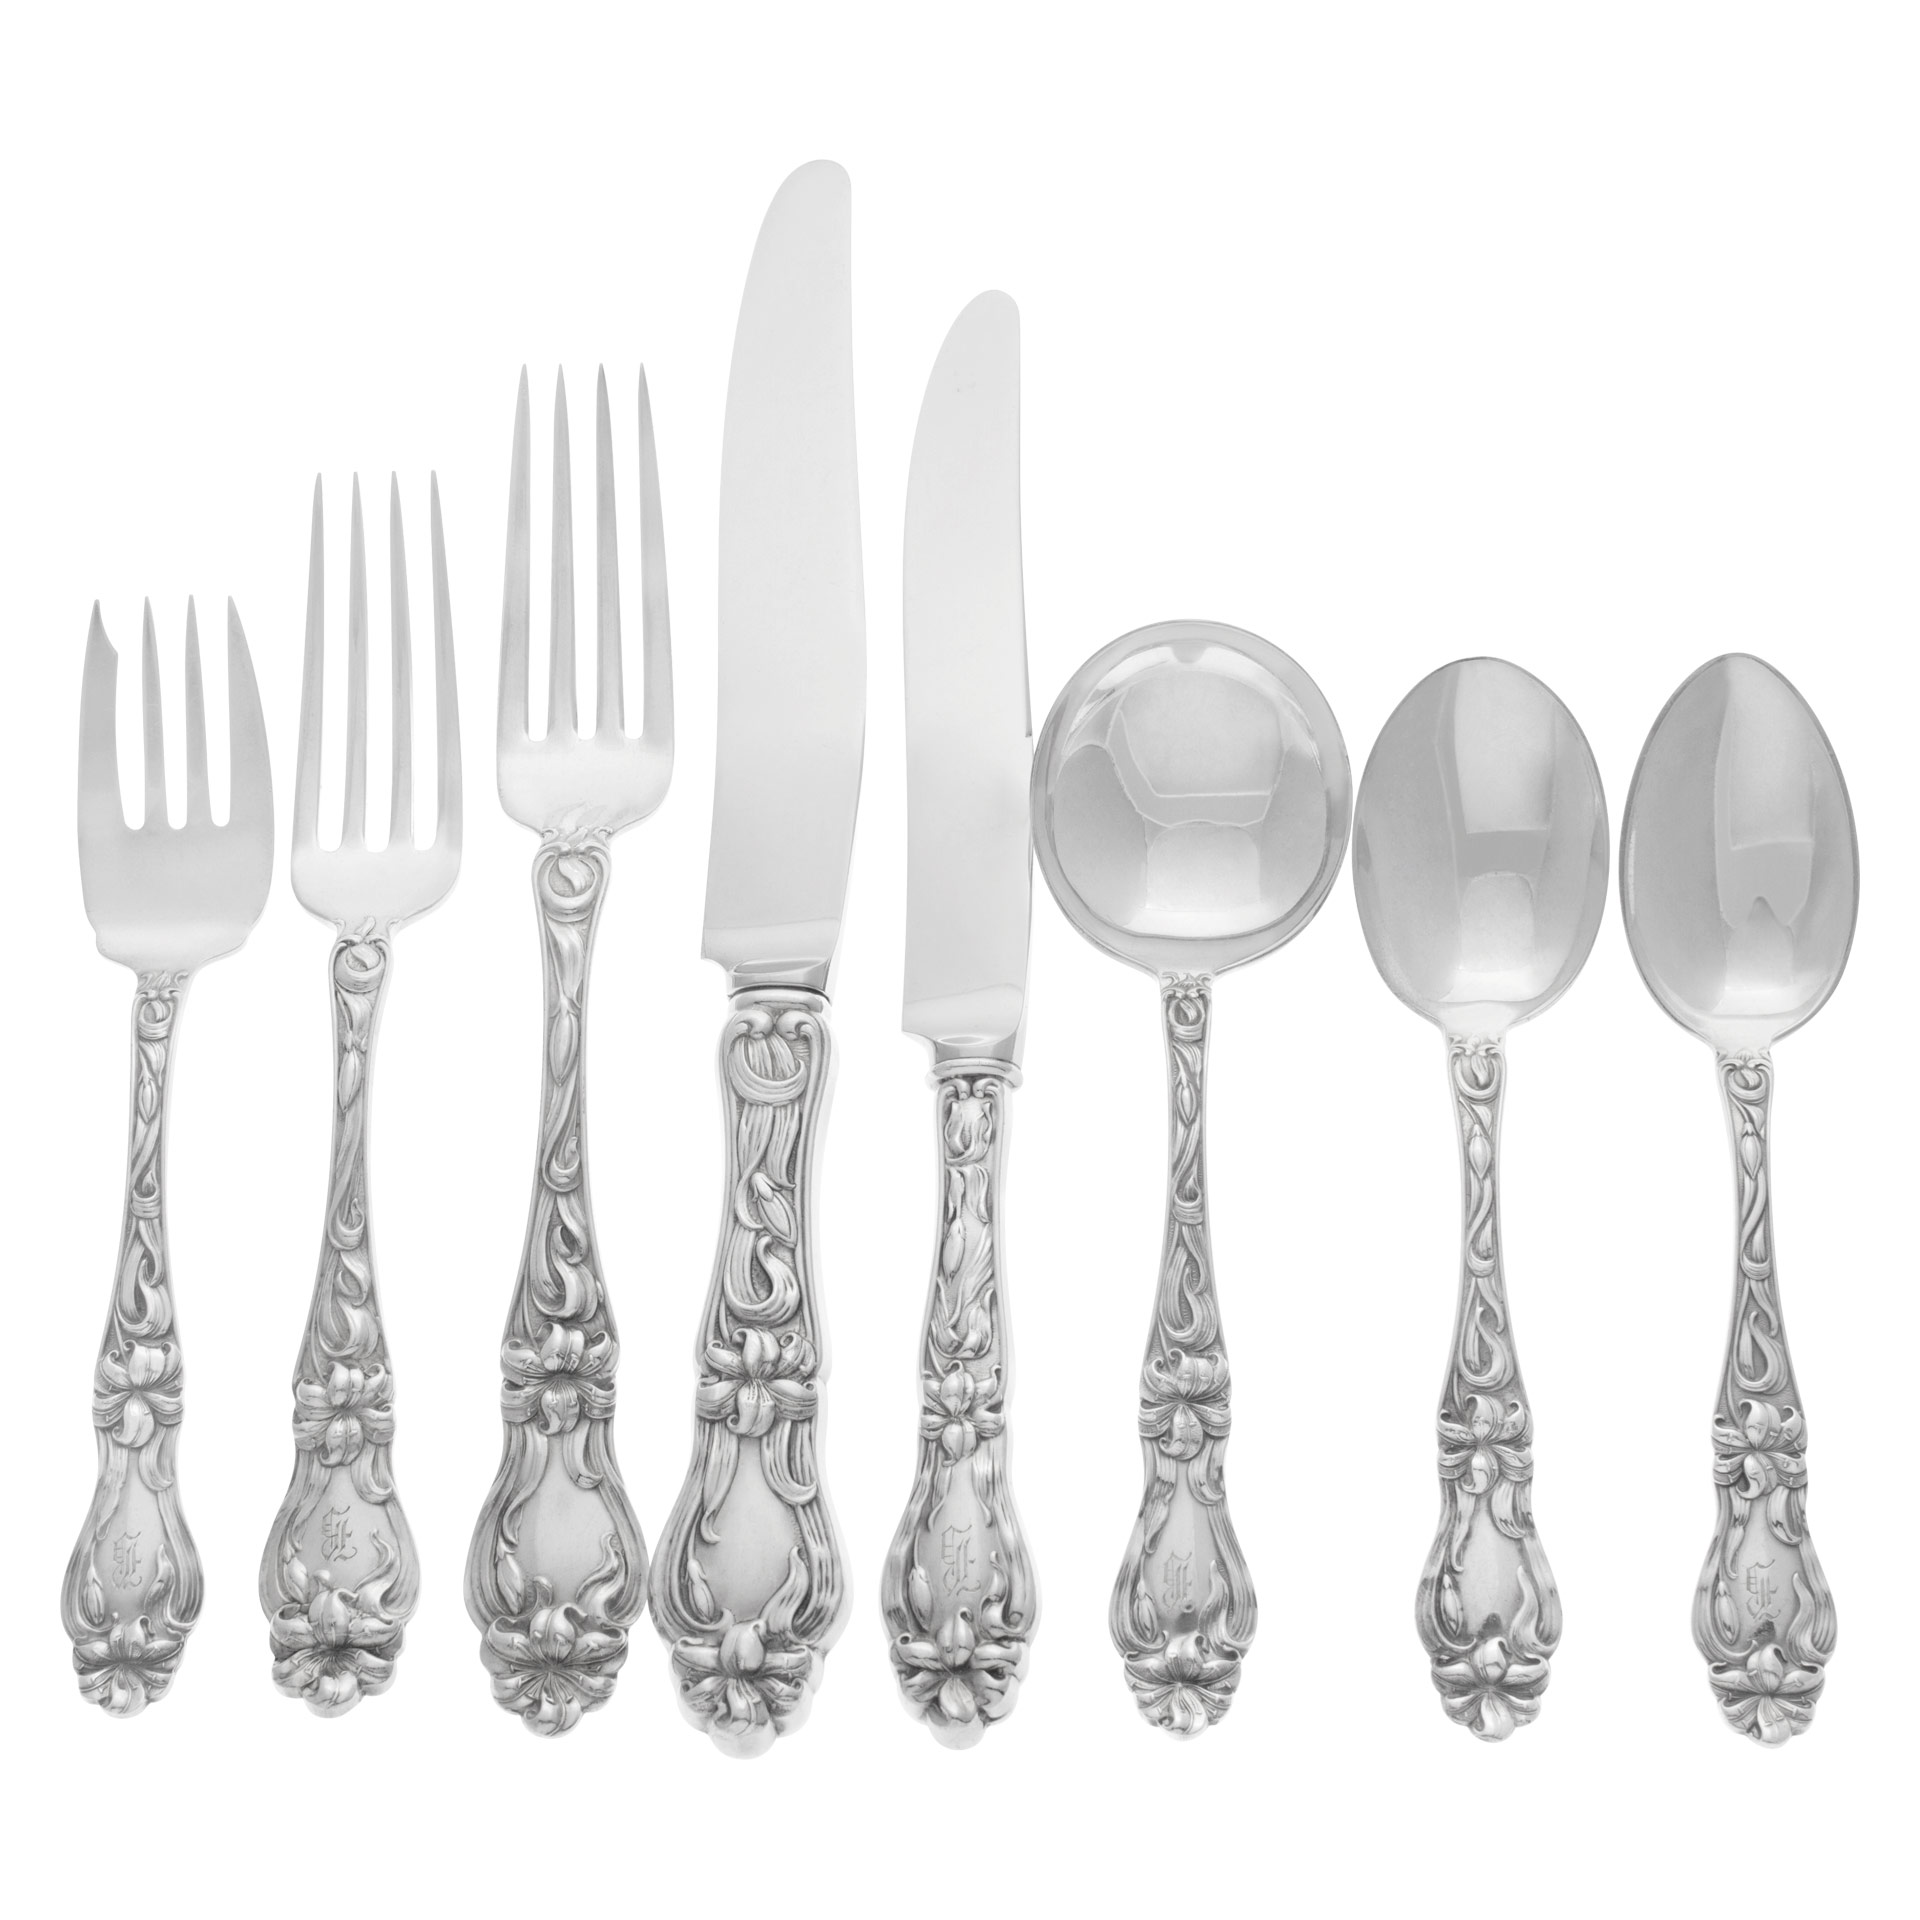 "LILY" Sterling flatware set ptd in 1910 by Frank M Whiting.  Almost complete 8 Place setting for 12 (Dinner & Lunch) + 5 Serving Pieces - 108 pieces total- image 1